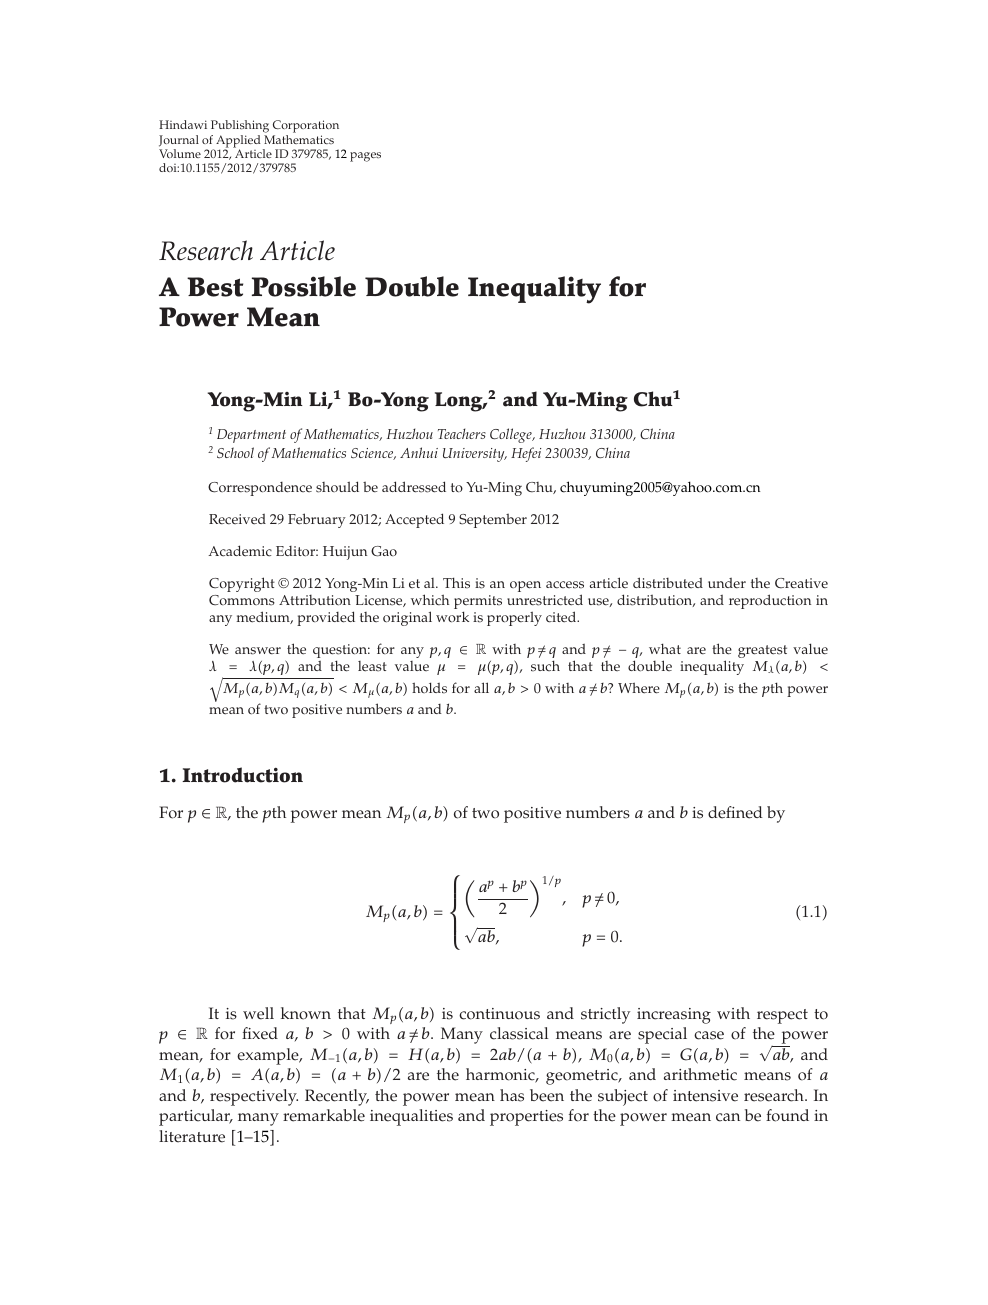 A Best Possible Double Inequality For Power Mean Topic Of Research Paper In Mathematics Download Scholarly Article Pdf And Read For Free On Cyberleninka Open Science Hub